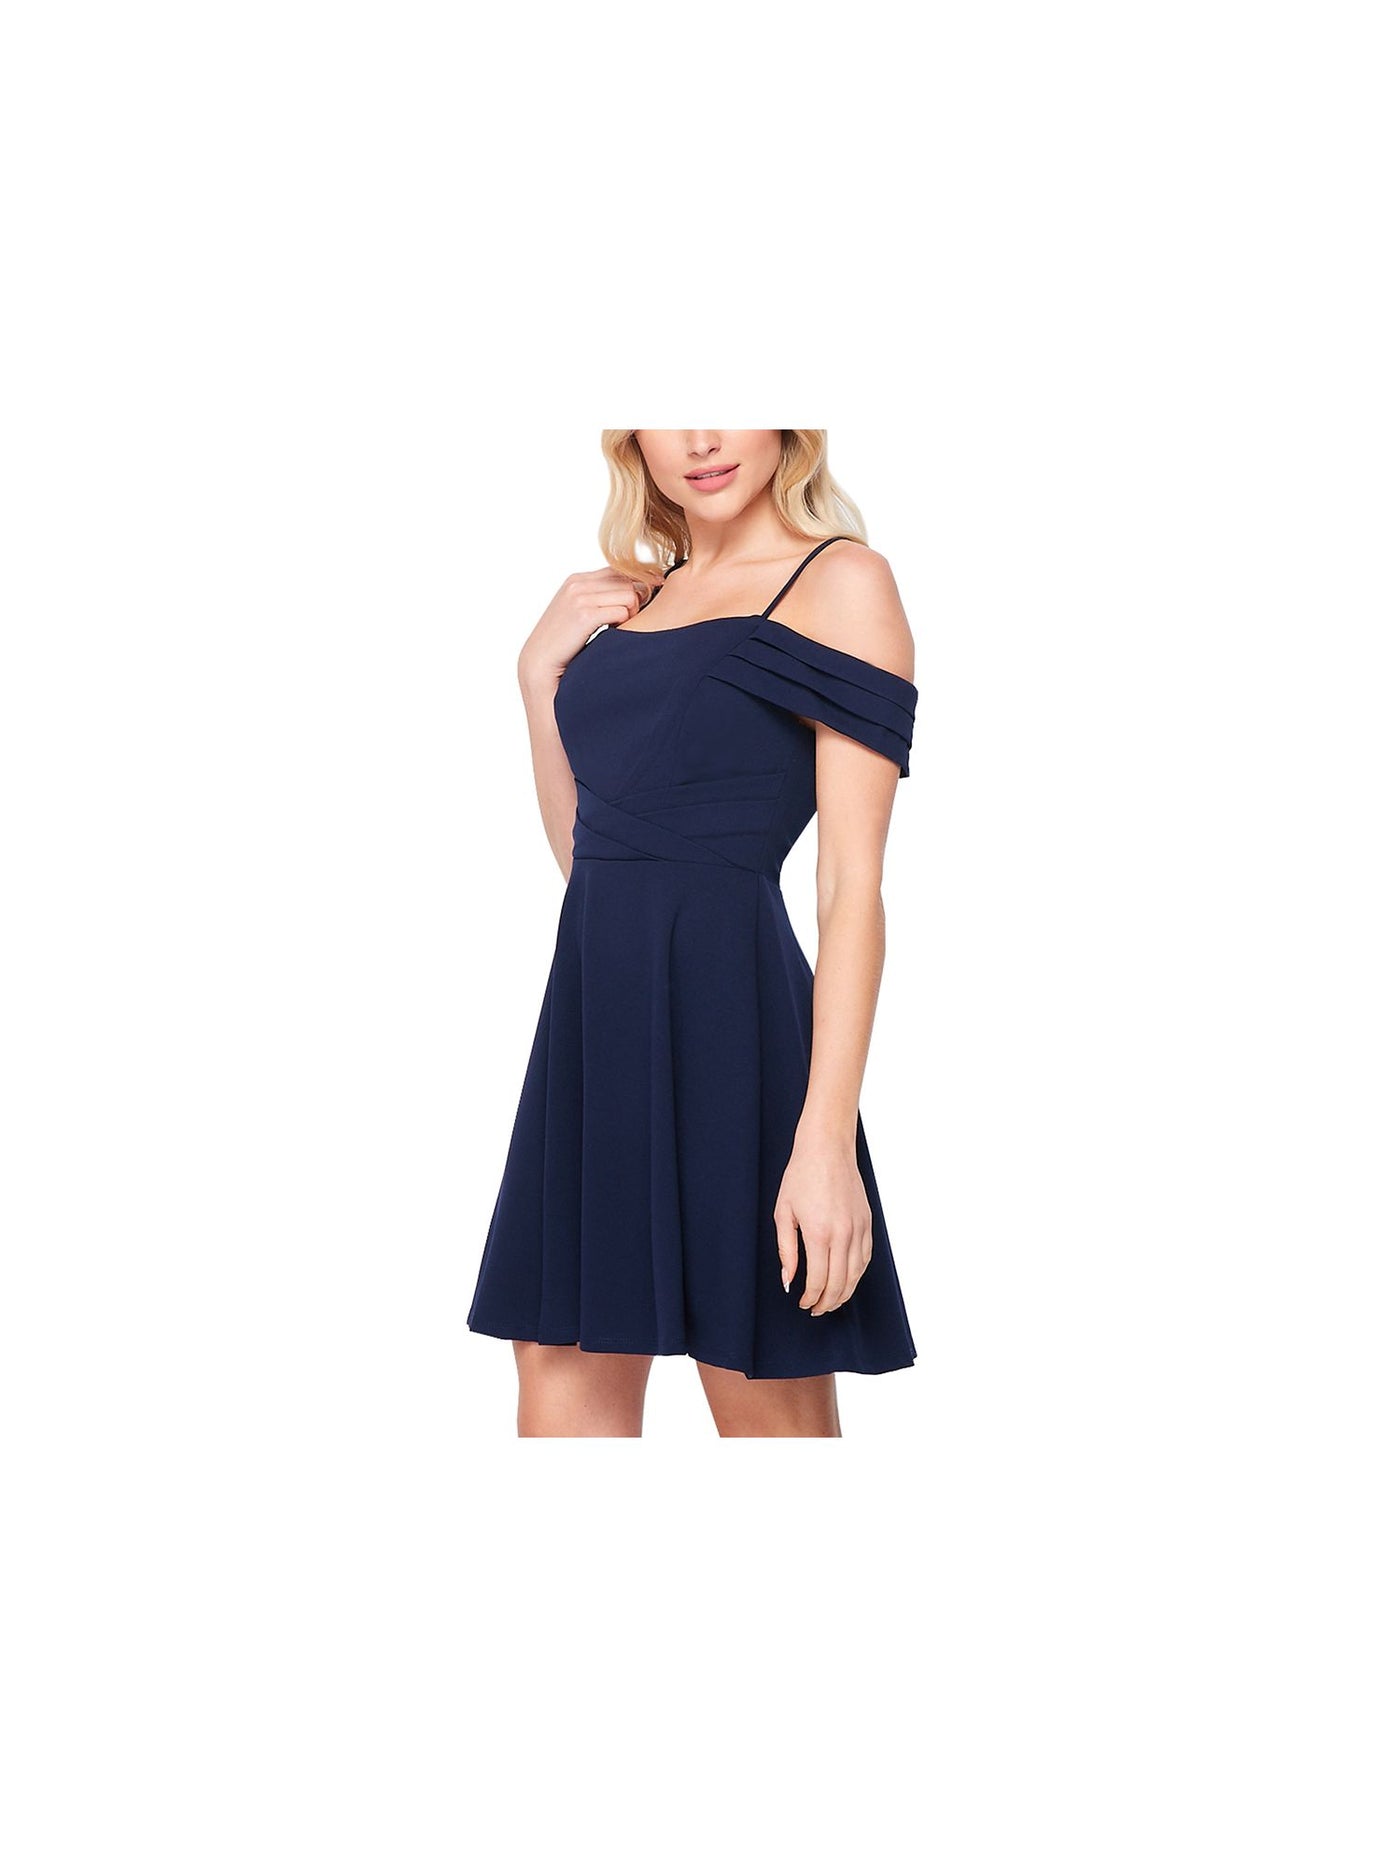 TEEZE ME Womens Navy Stretch Zippered Cold Shoulder Short Sleeve Square Neck Mini Cocktail Fit + Flare Dress Juniors 13\14